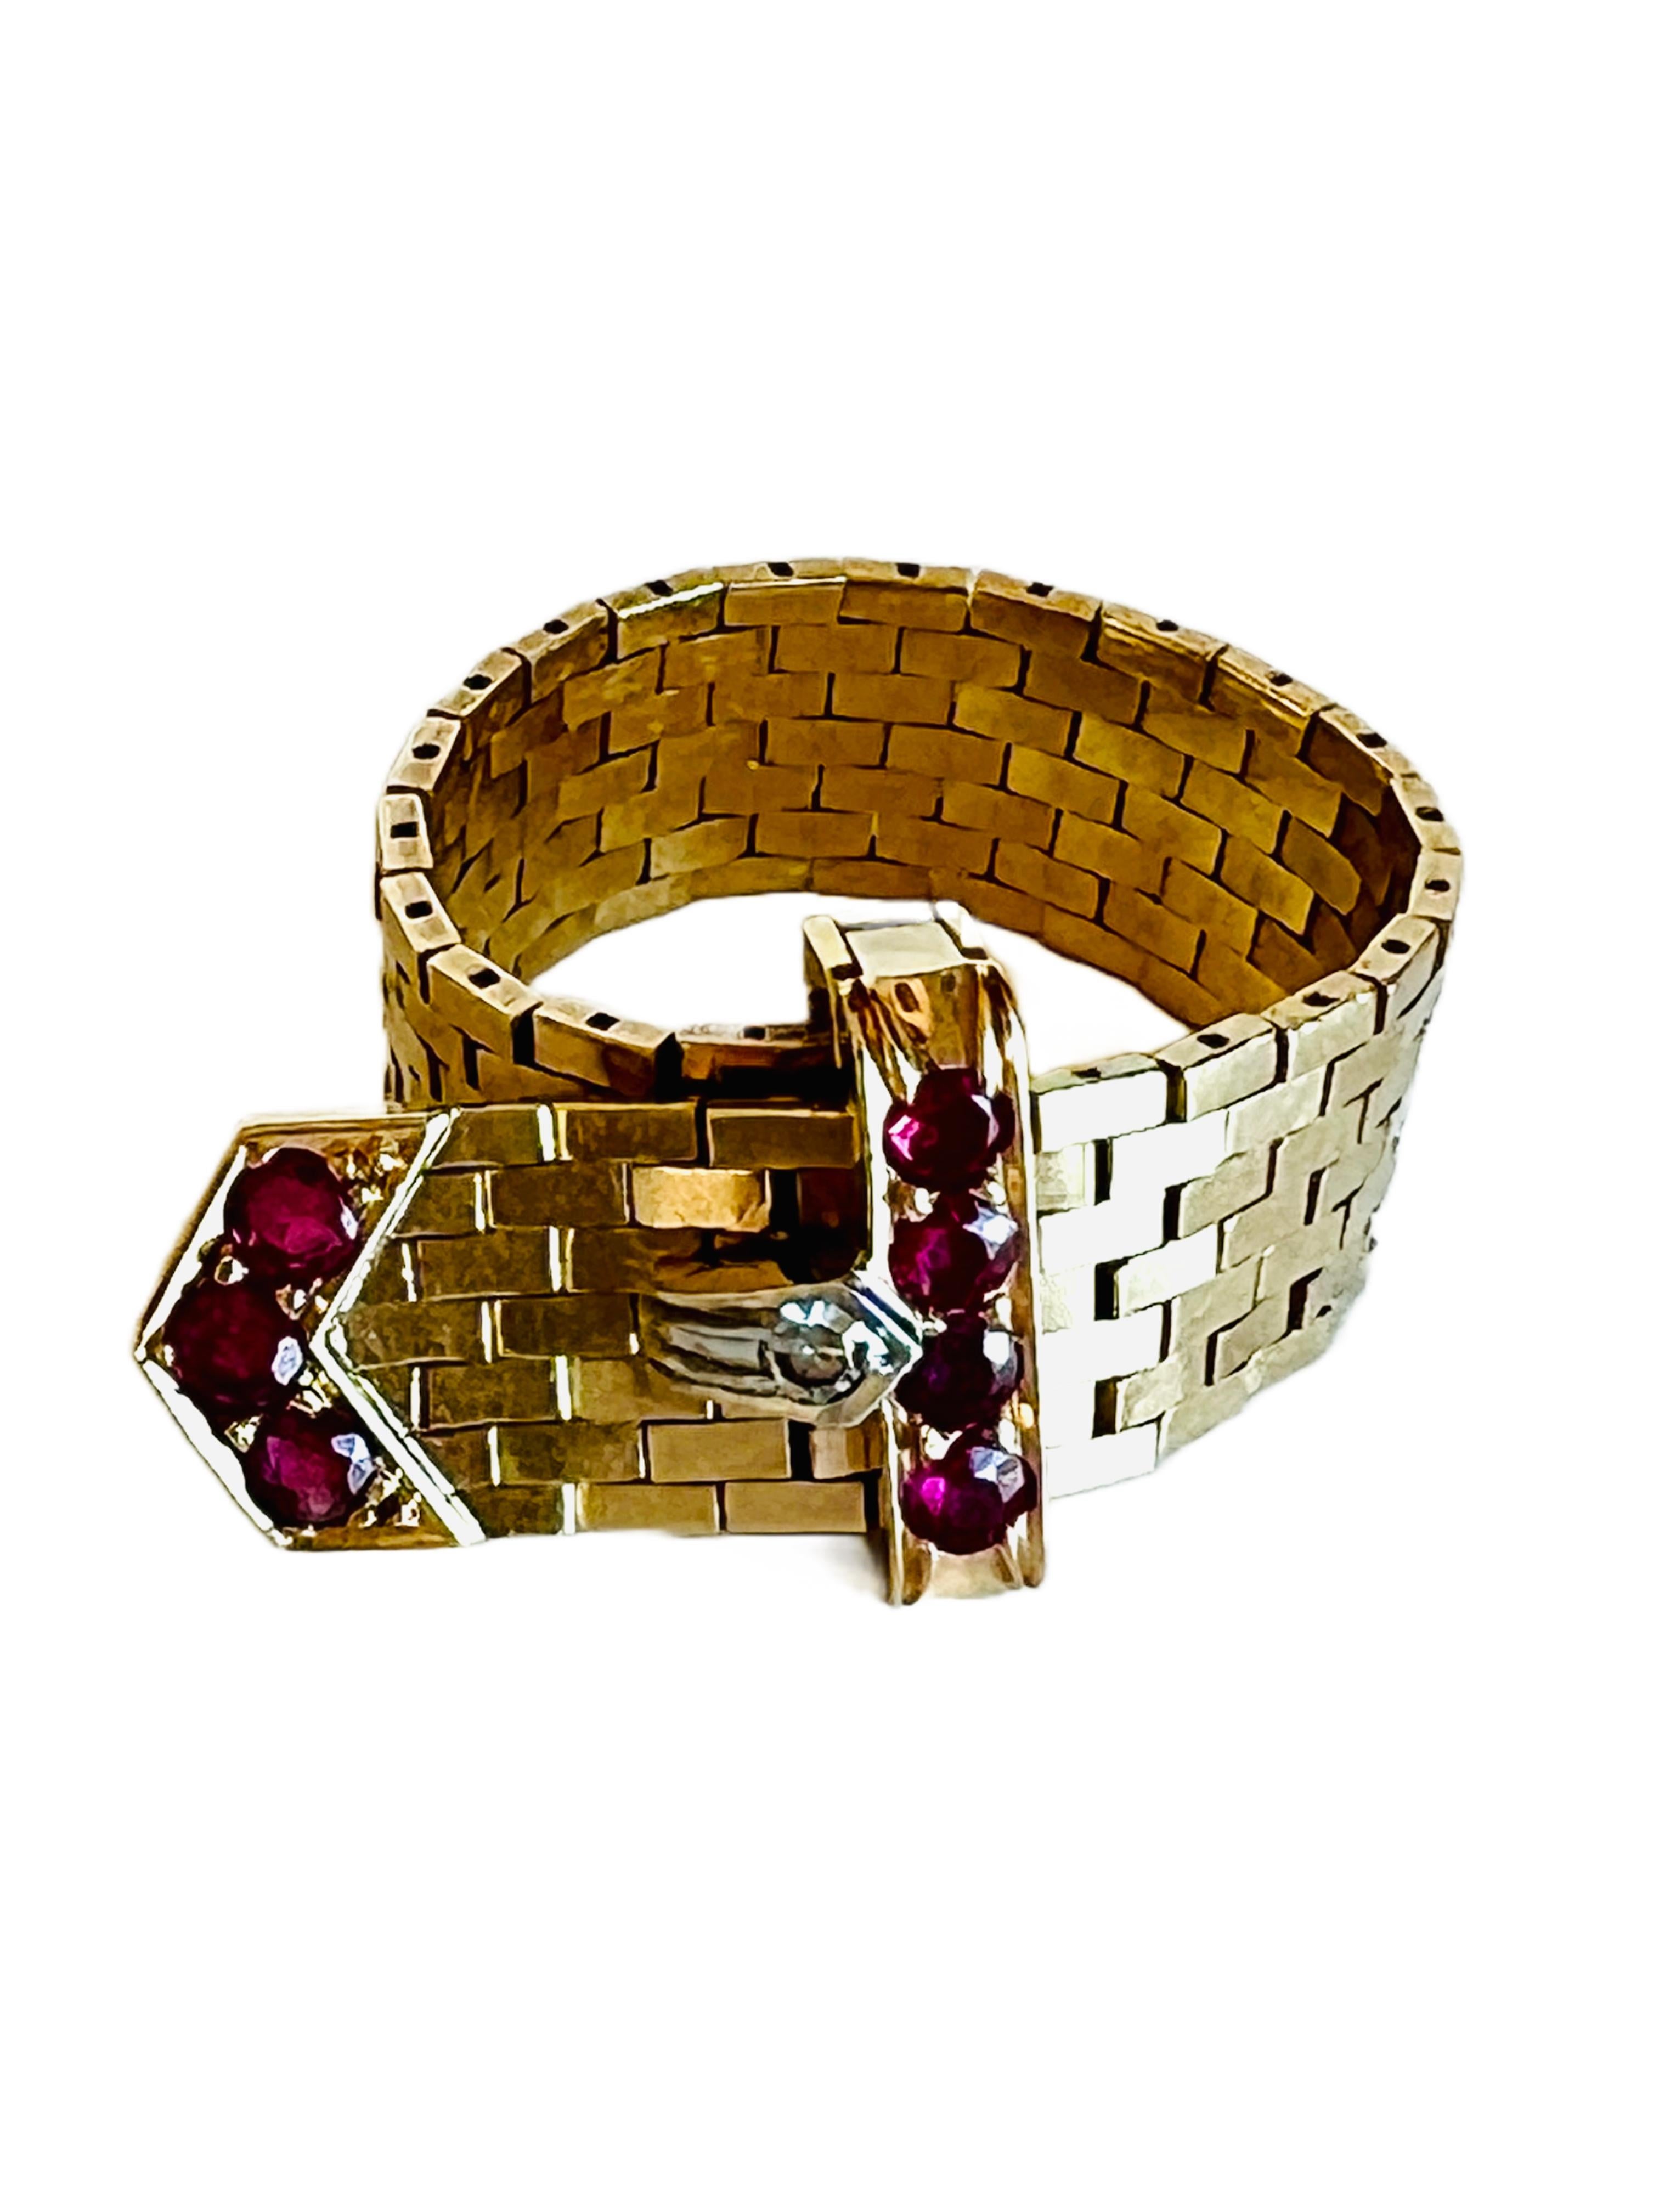 Stylish 1940's retro 14k gold, platinum, diamond and ruby mesh buckle ring.

The folding buckle is set with four round rubies and a small diamond in platinum. The tip of the ring is set with three additional round rubies. 6 of the 7 rubies are